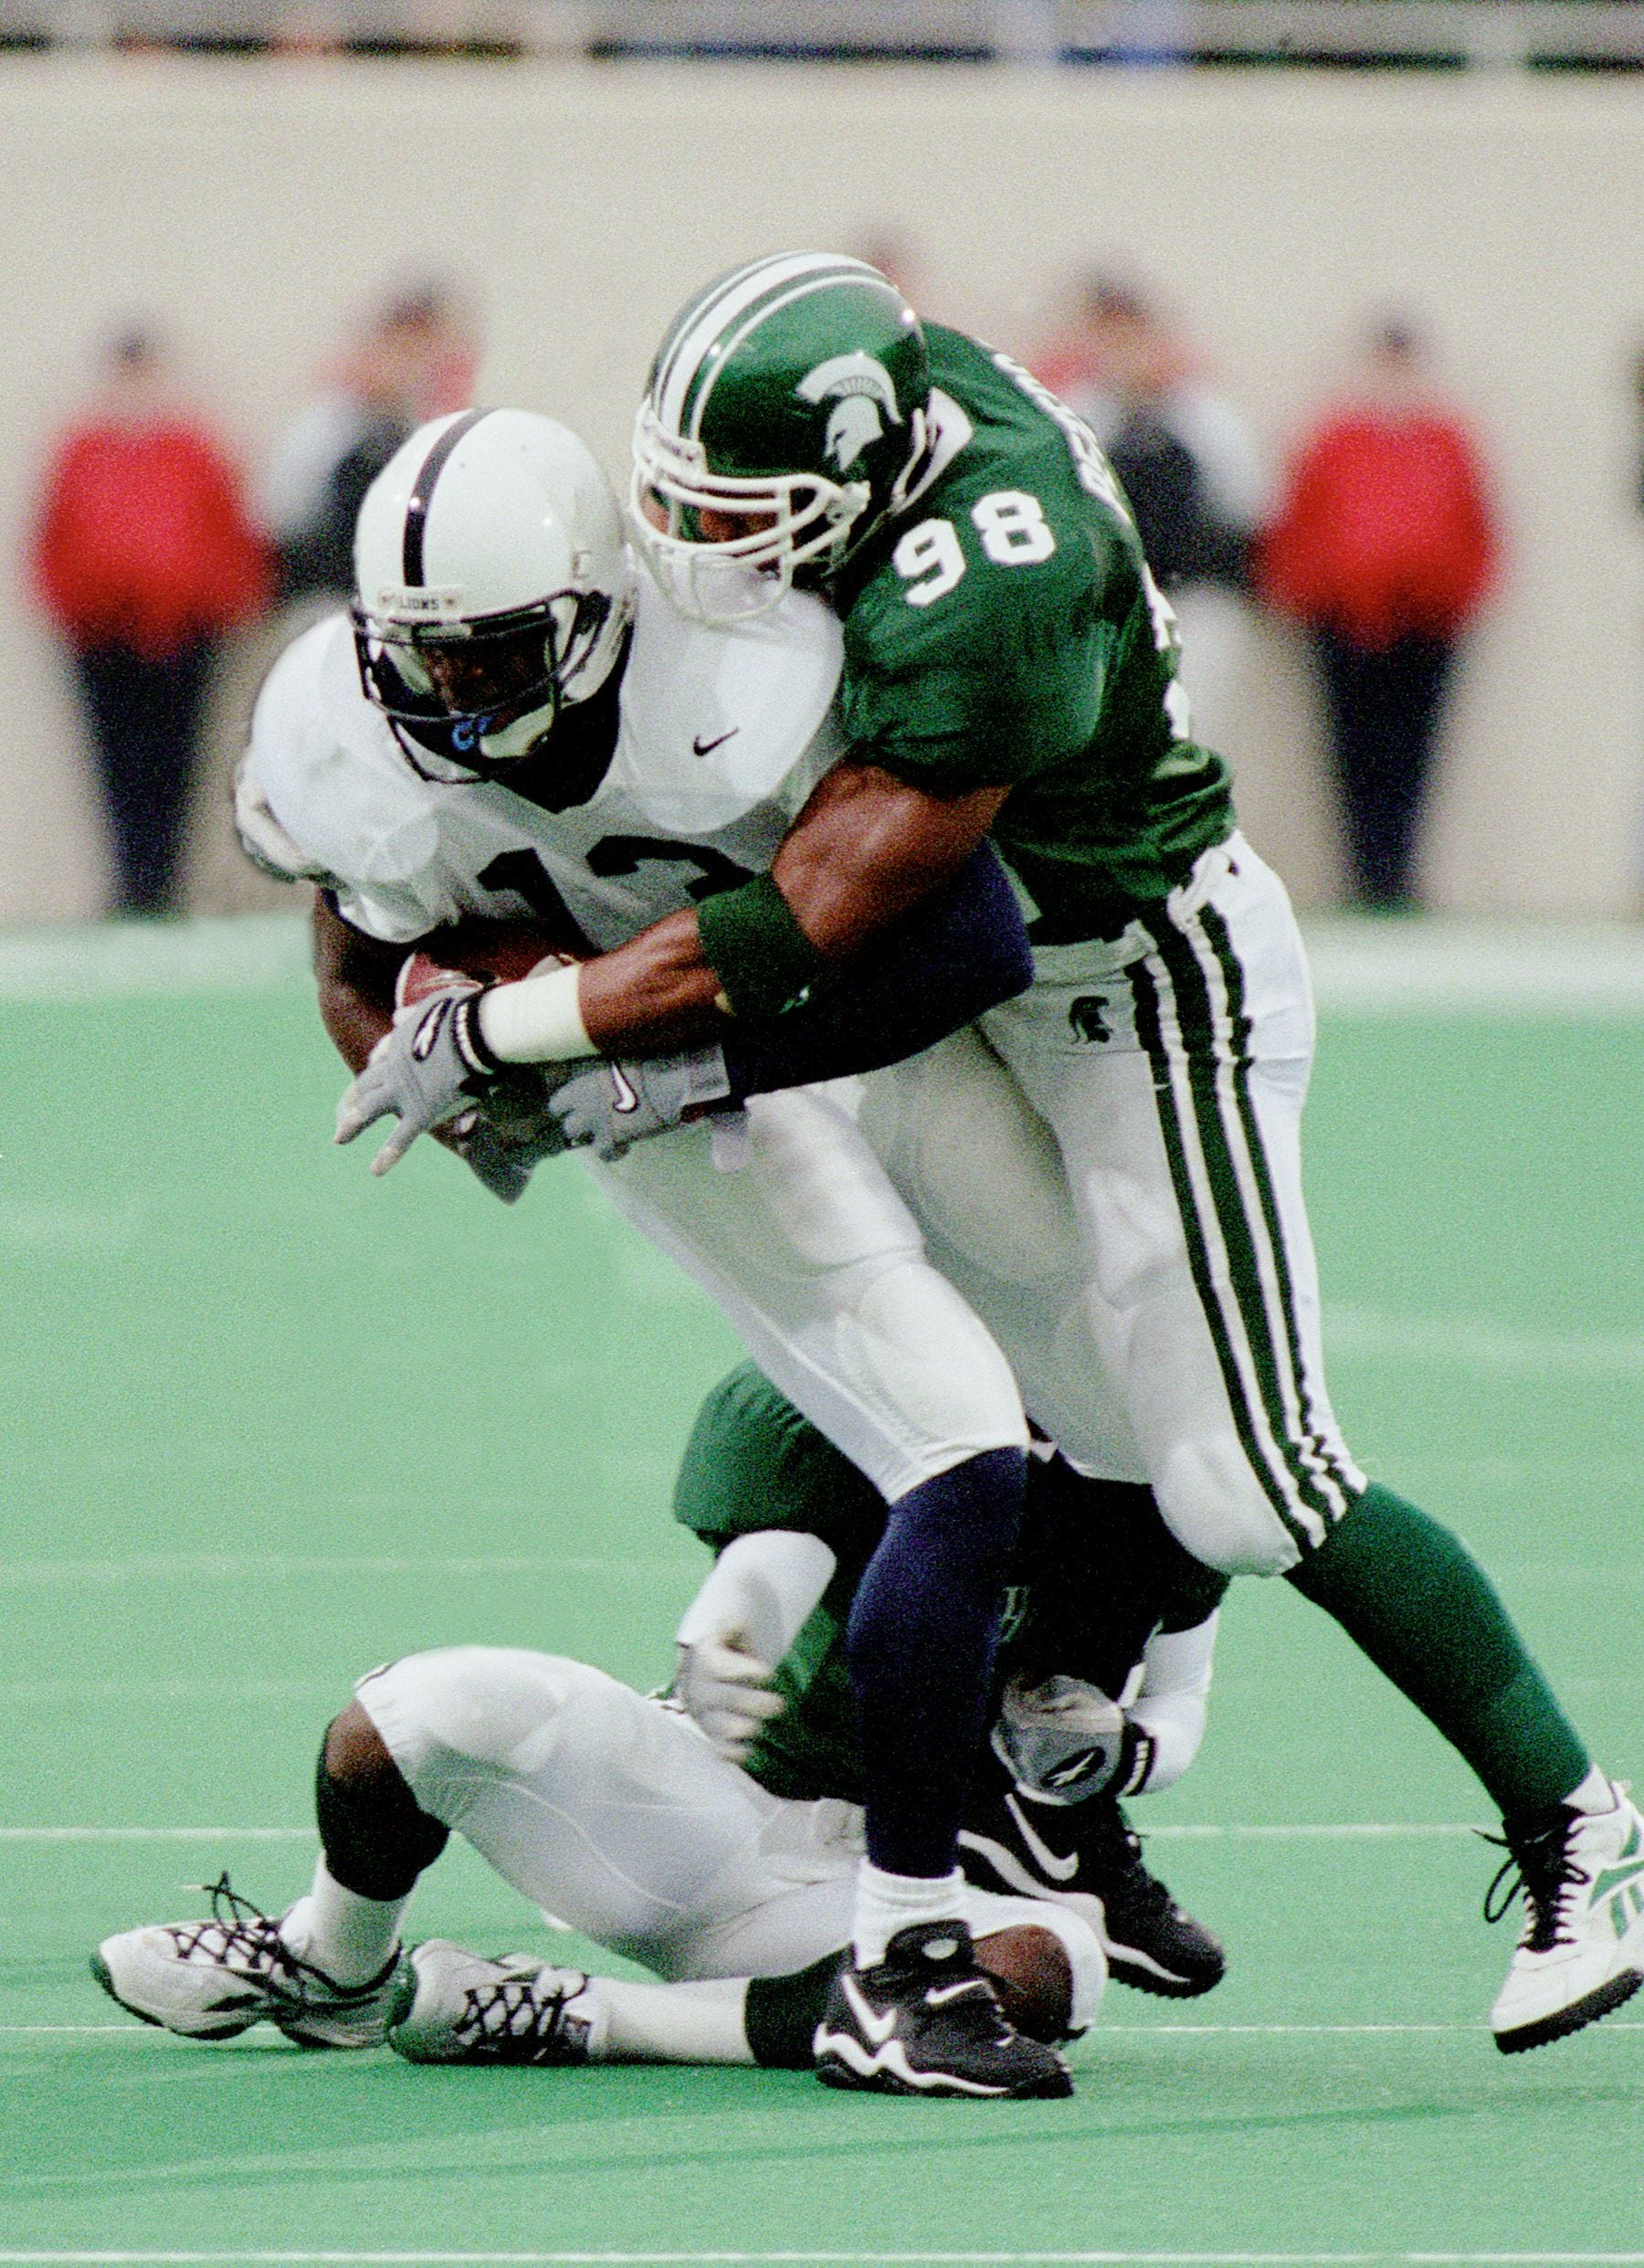 LINEBACKER – Julian Peterson, 1998-99: In just two seasons, the outside linebacker piled up 48 tackles for loss, a program record that stood until 2019, when Kenny Willekes finished with 51. Peterson was nearly unstoppable in his final season at Michigan State, recording 30 tackles for loss as well as 15 of his career 25 sacks. Peterson was named a third-team All-American by the Associated Press that season and capped things off by being named MVP of the Citrus Bowl with five tackles for loss.